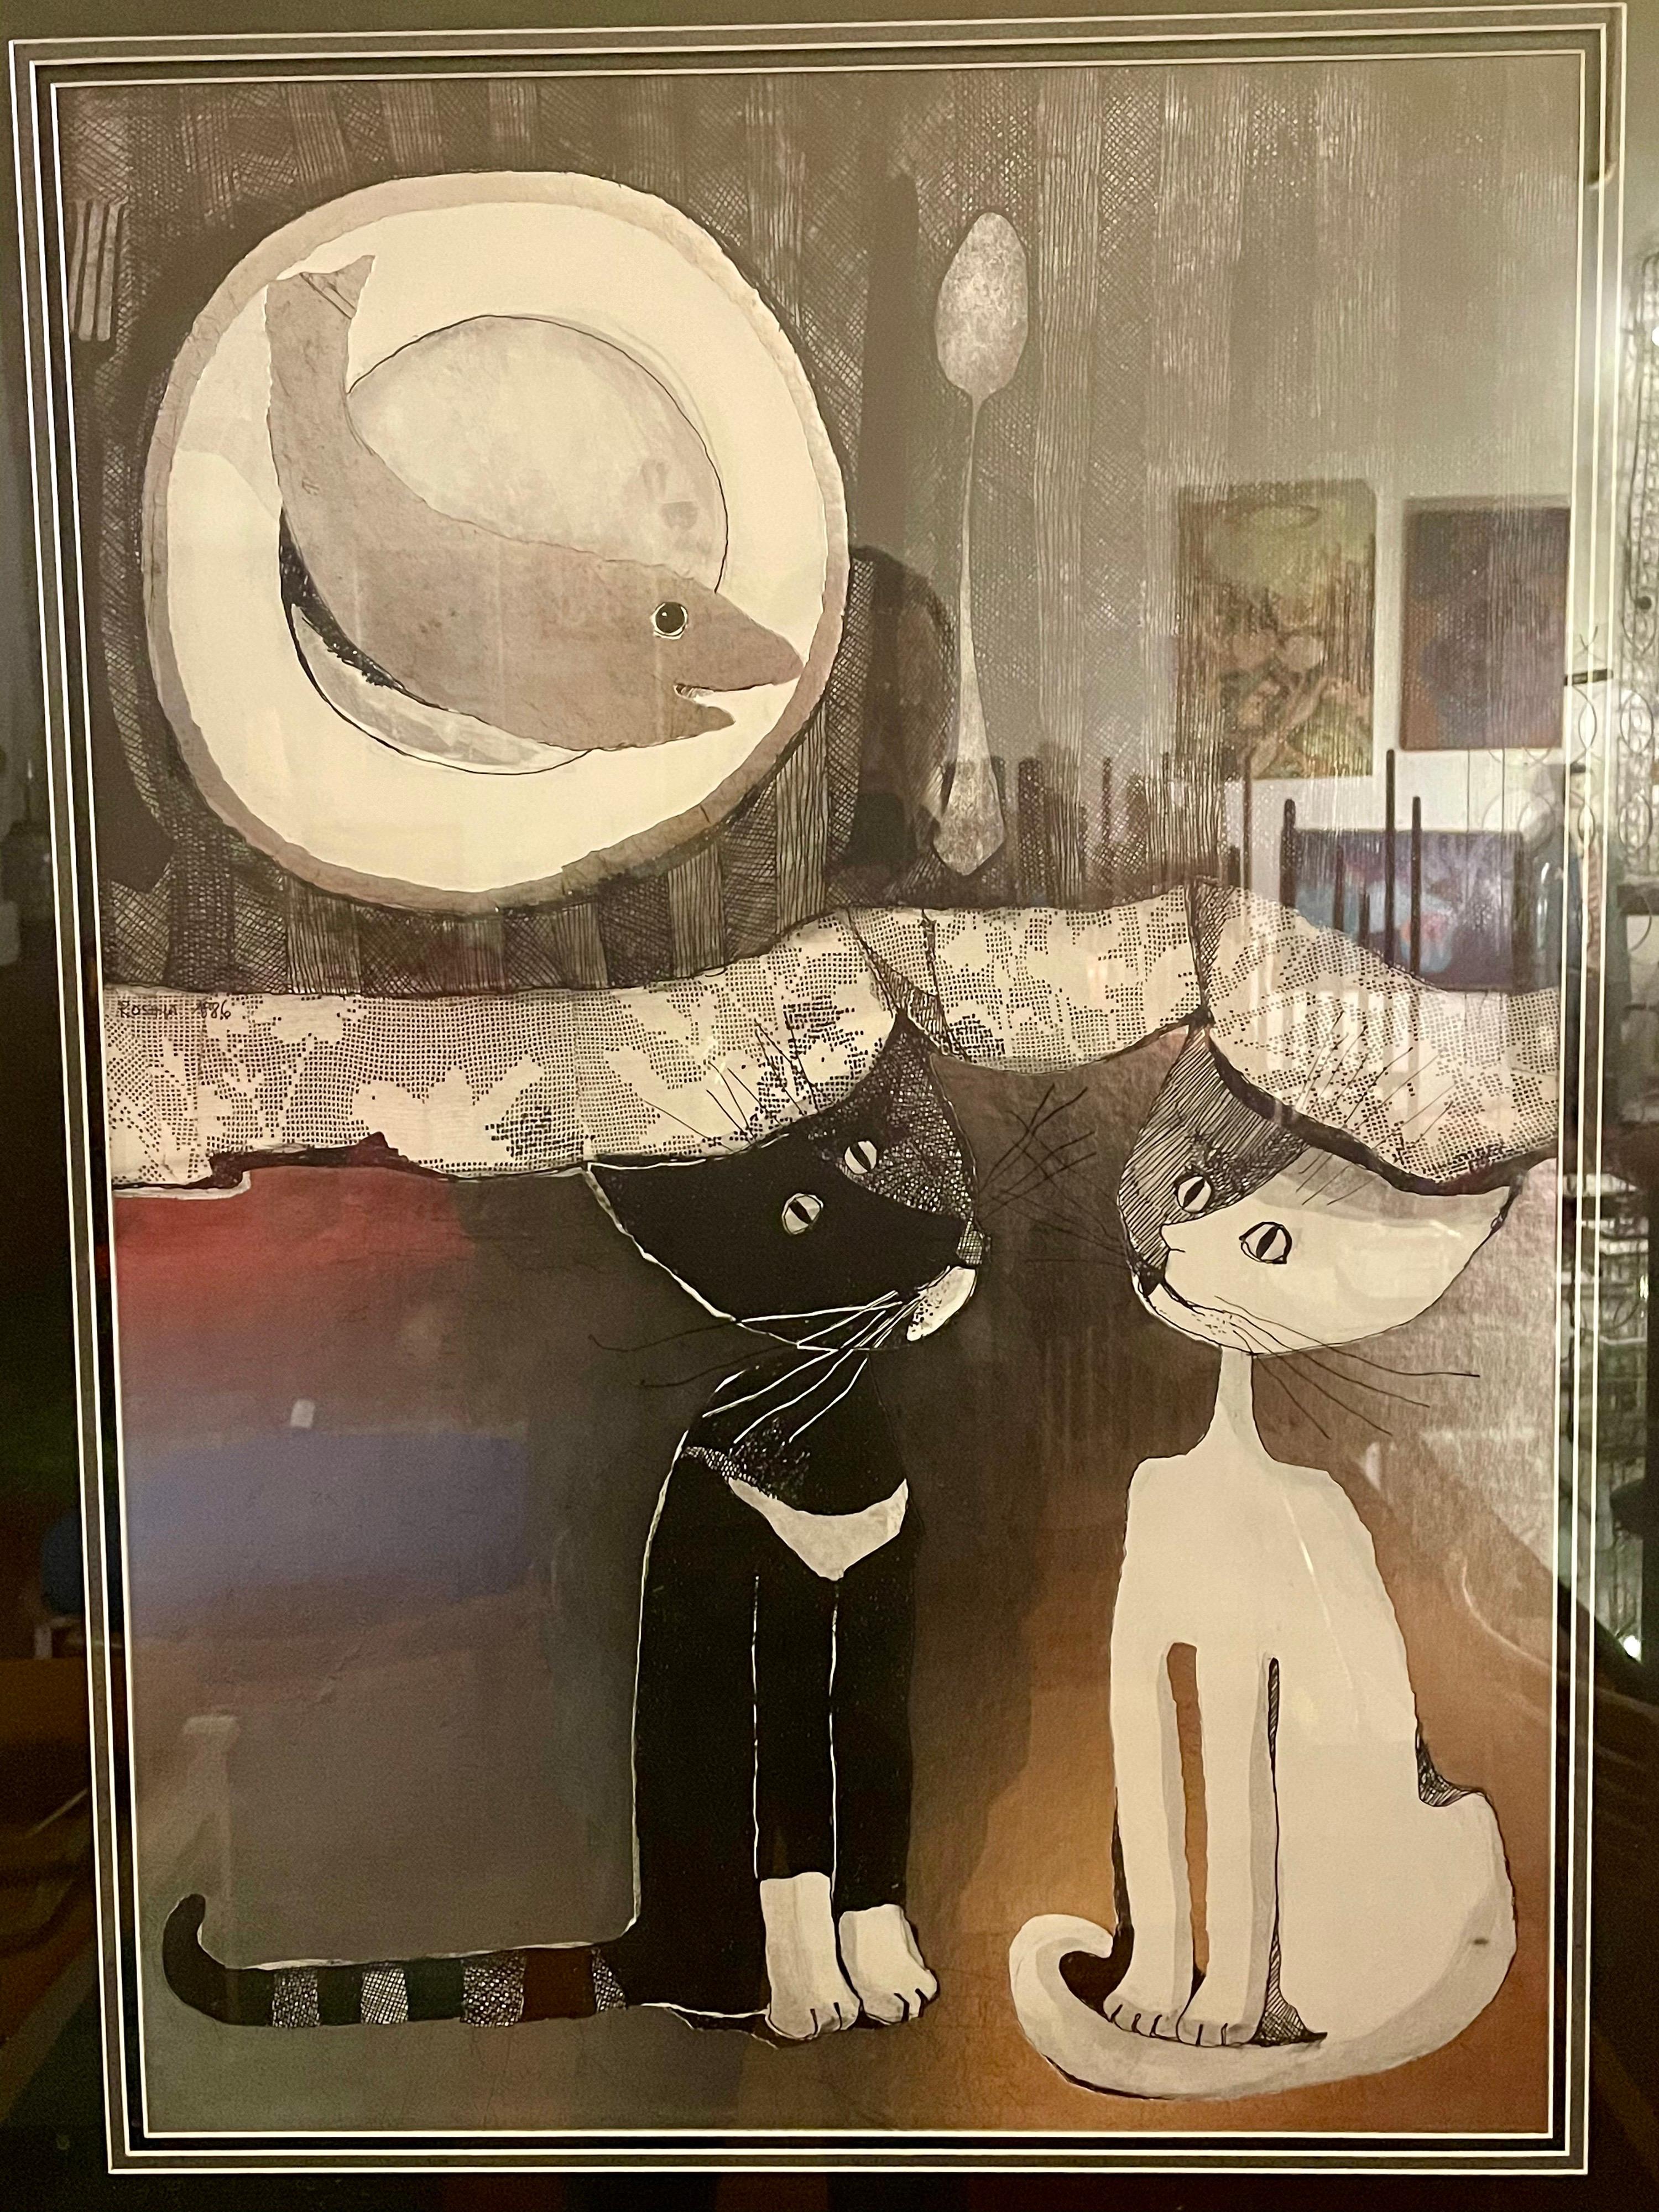 Post-Modern Original Lithograph by Listed Artist Rosina Wachtmeister